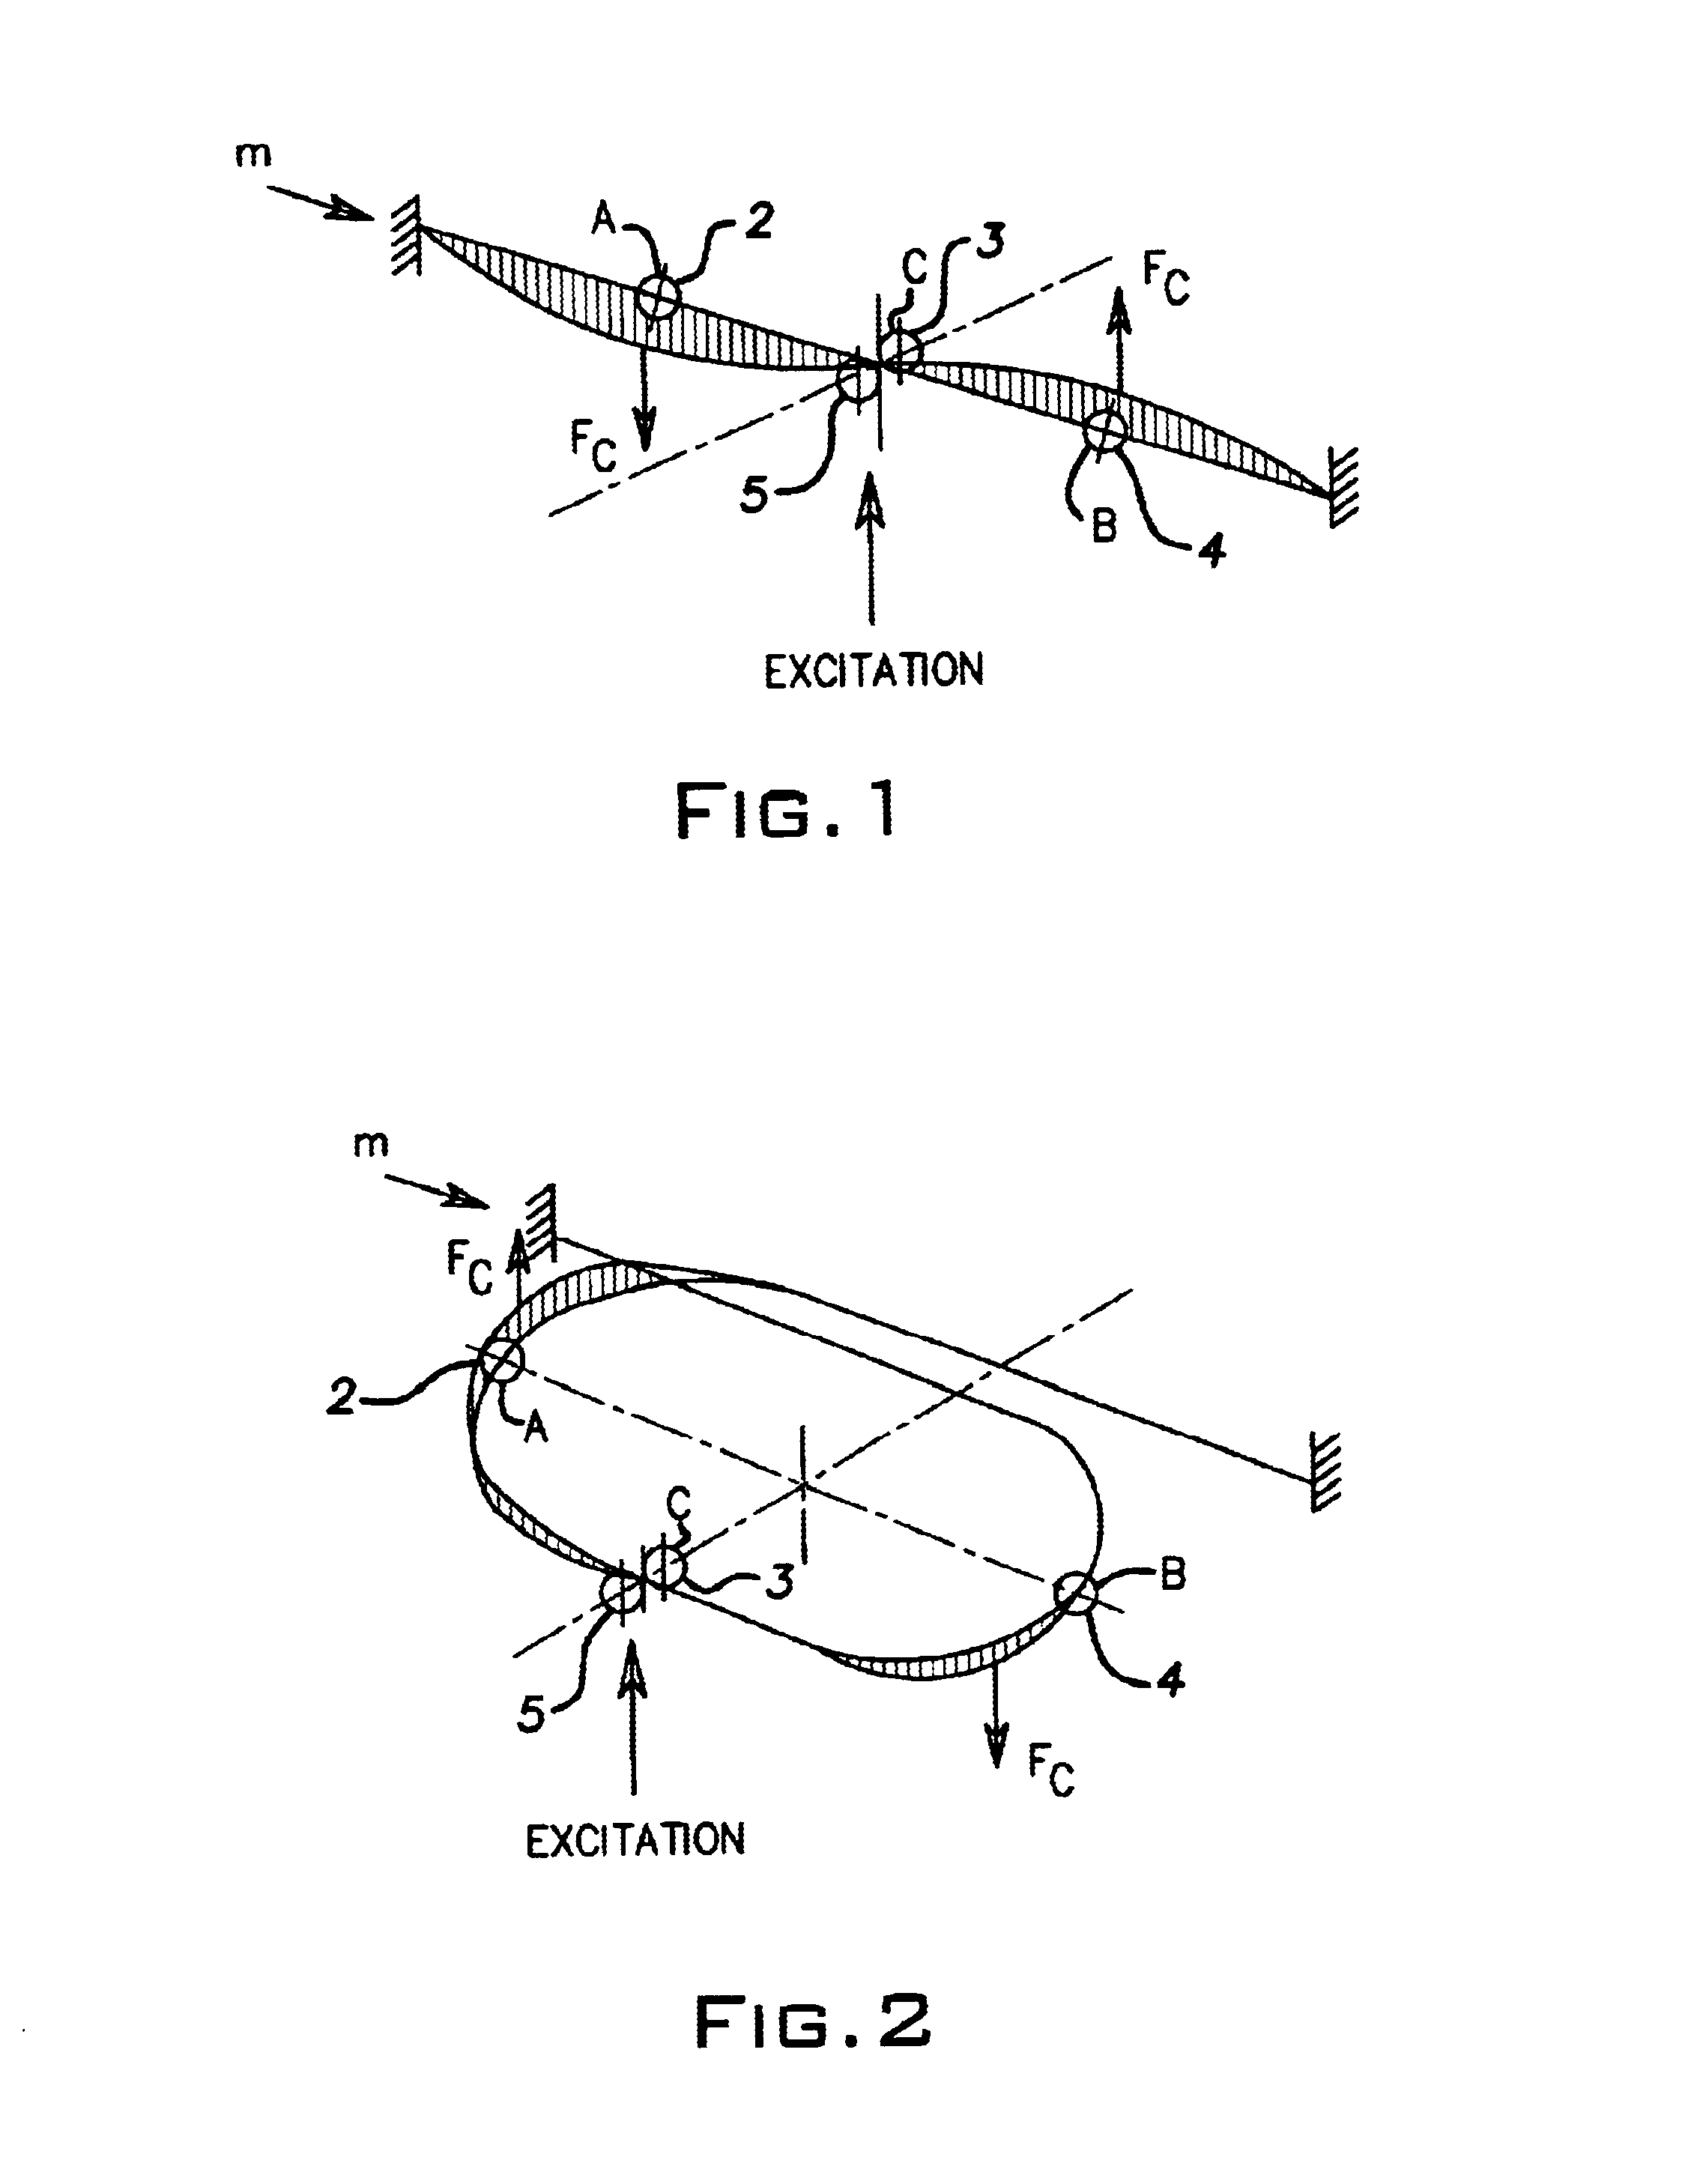 Method and device for detecting and compensating zero point influences on coriolis mass flowmeters